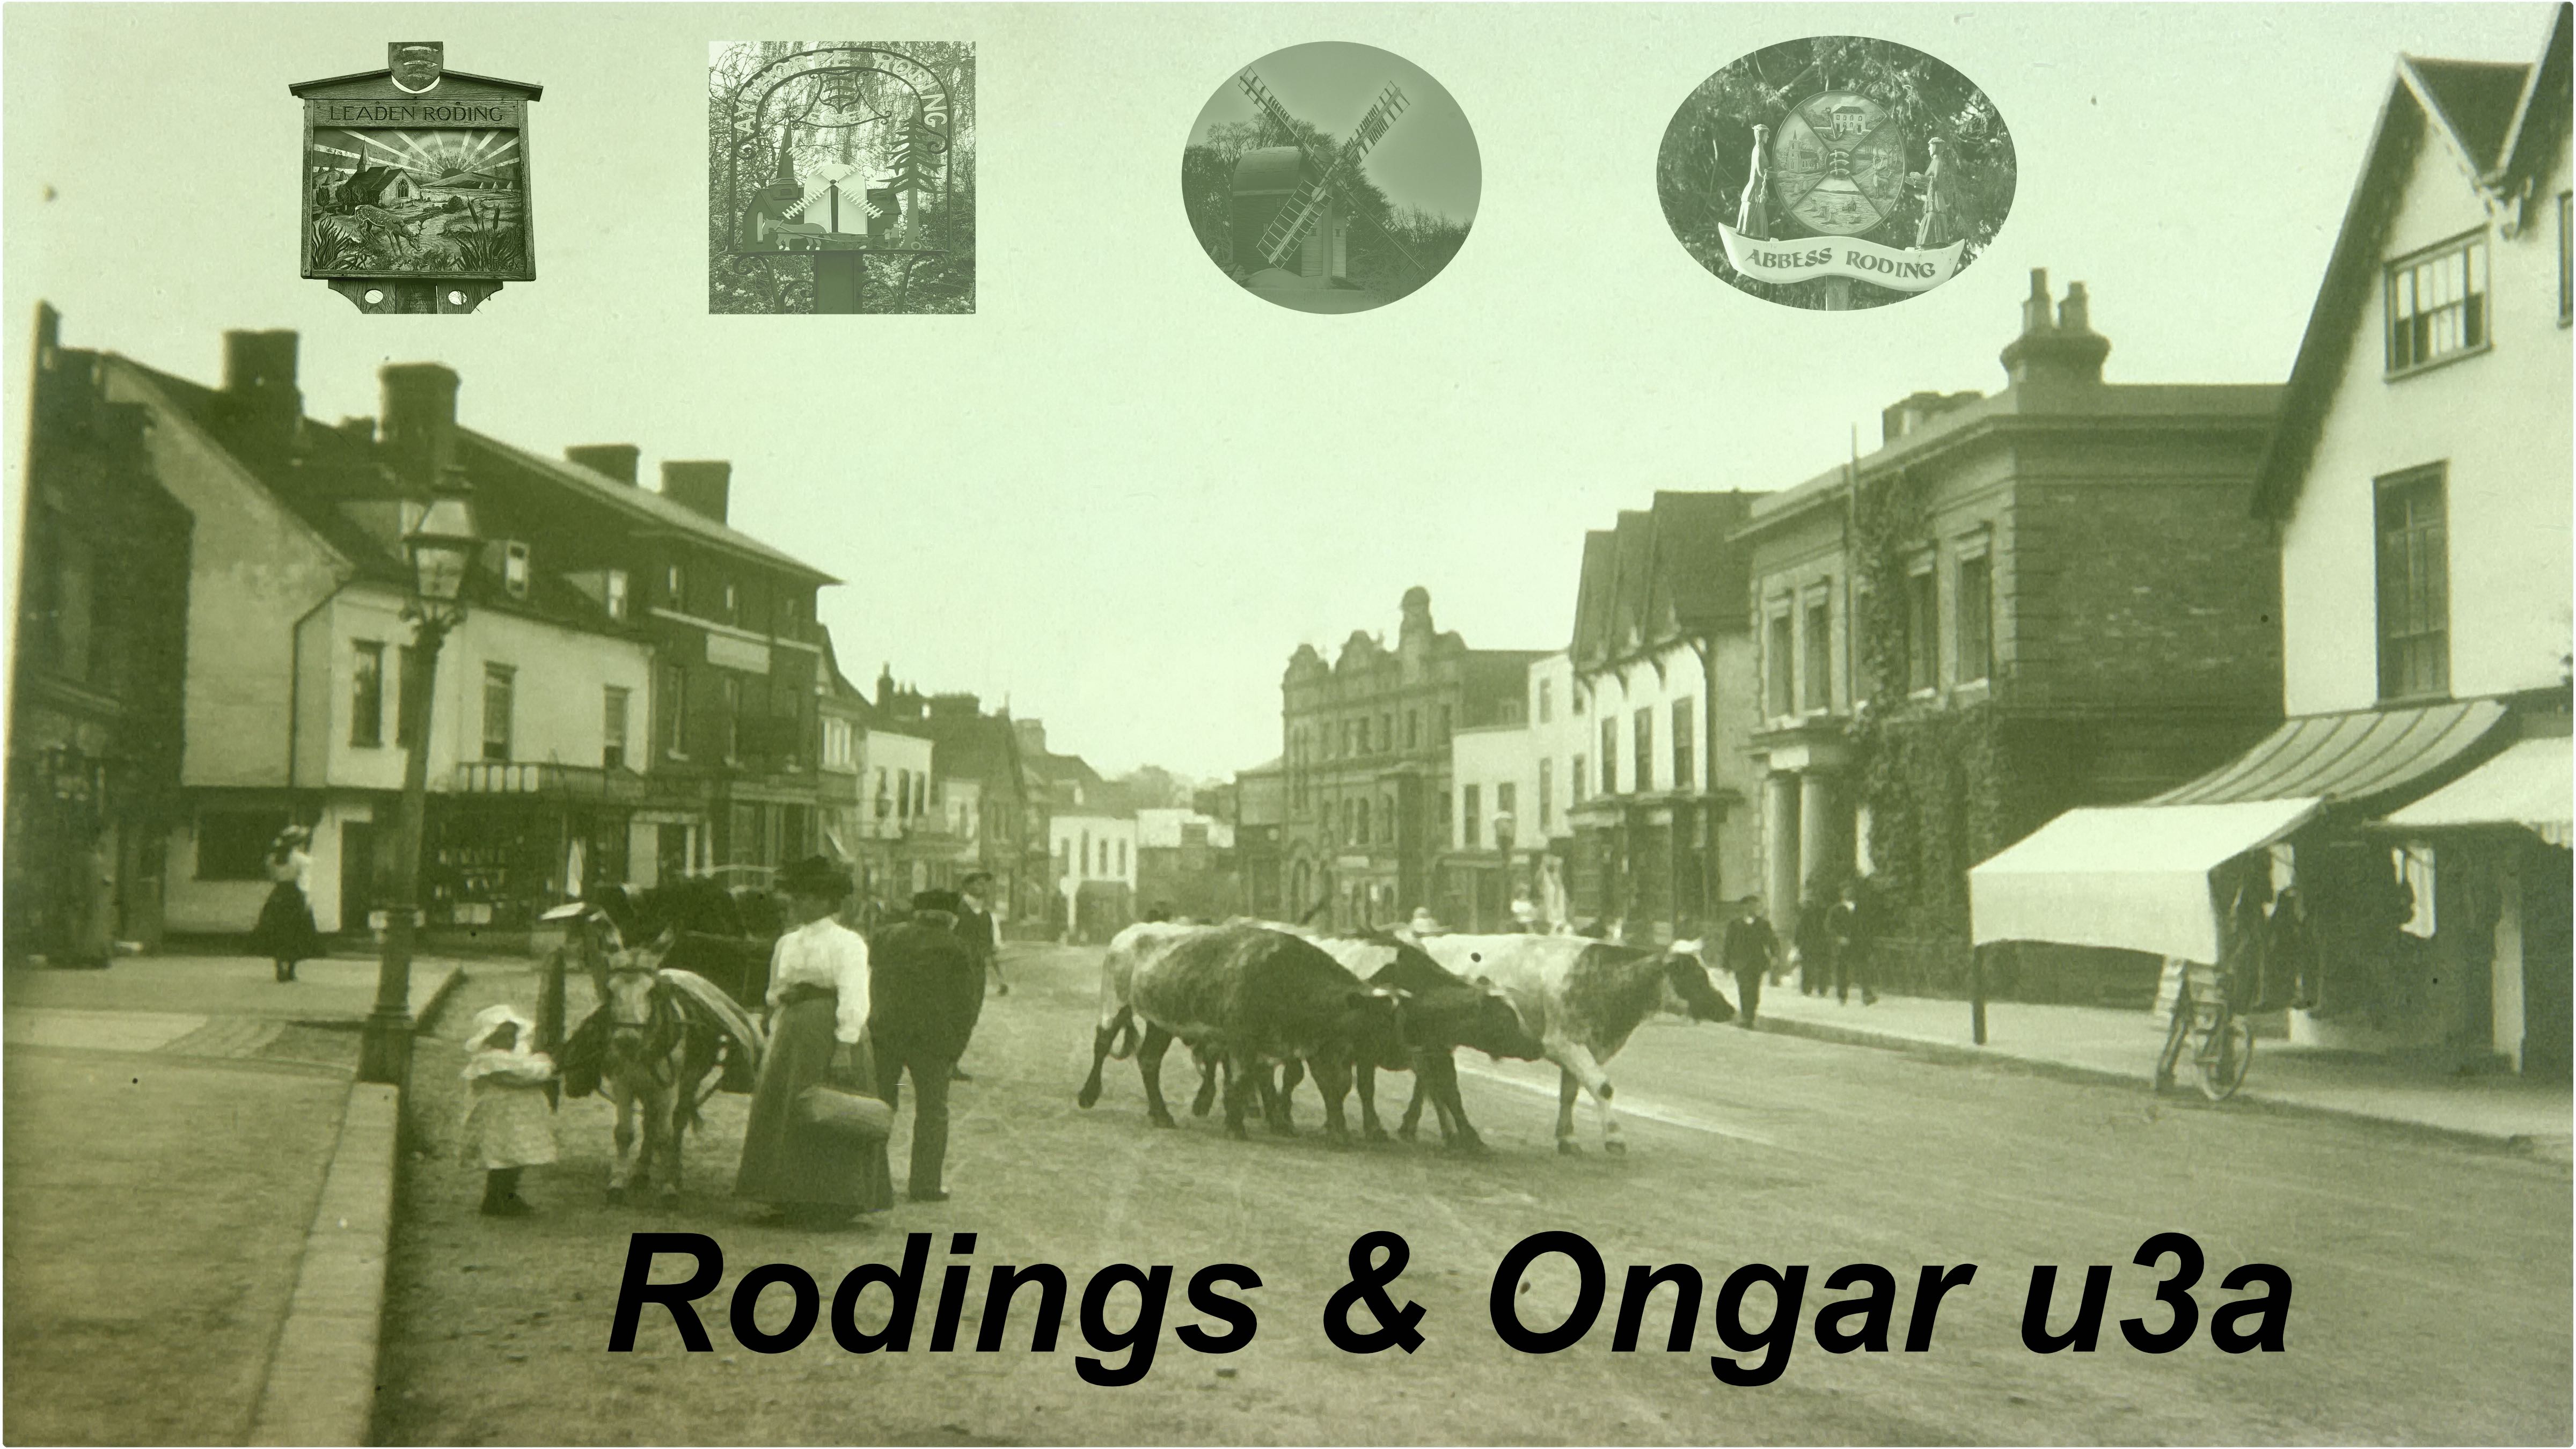 Welcome to Rodings and Ongar